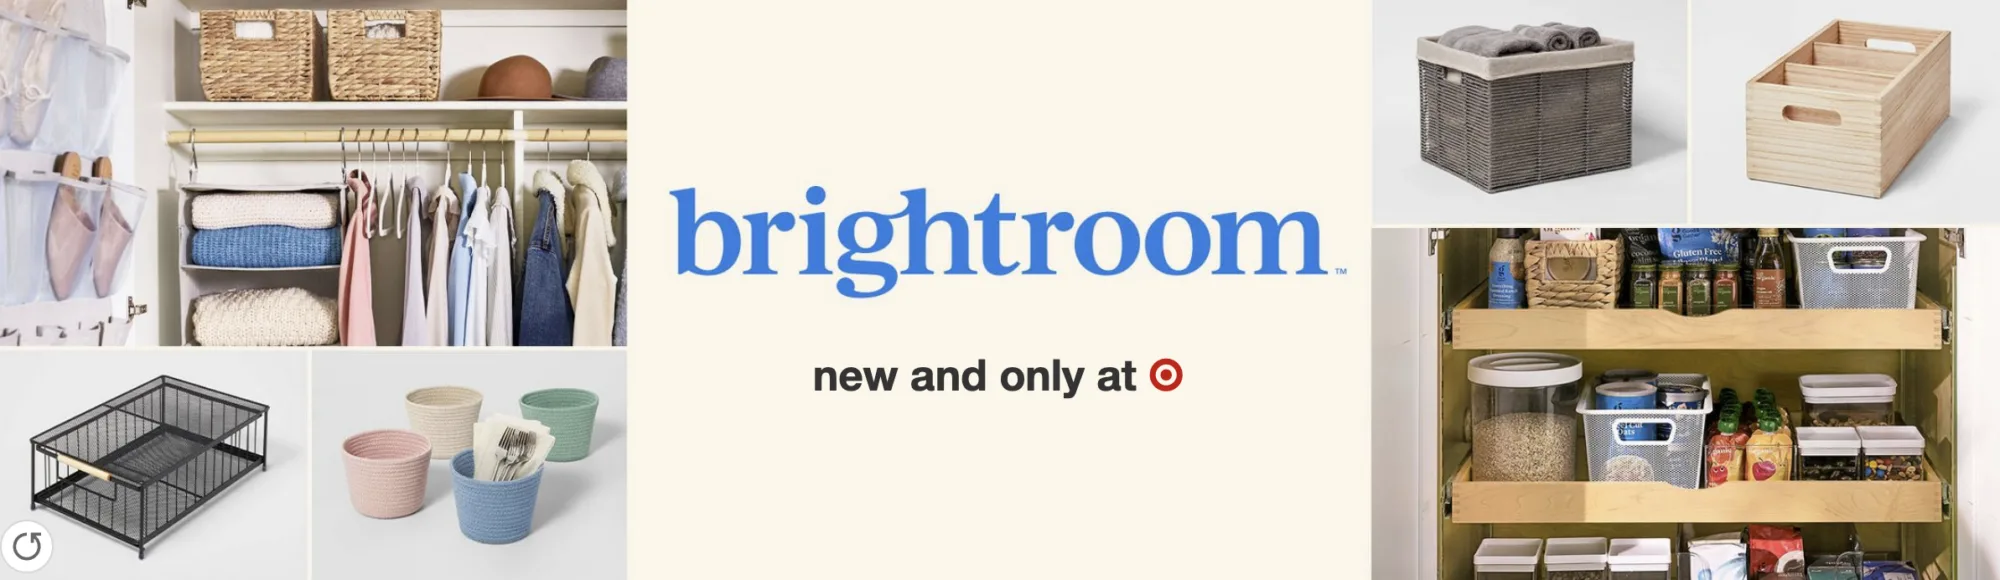 Target's New Brightroom Home Organization Collection Starts at $1